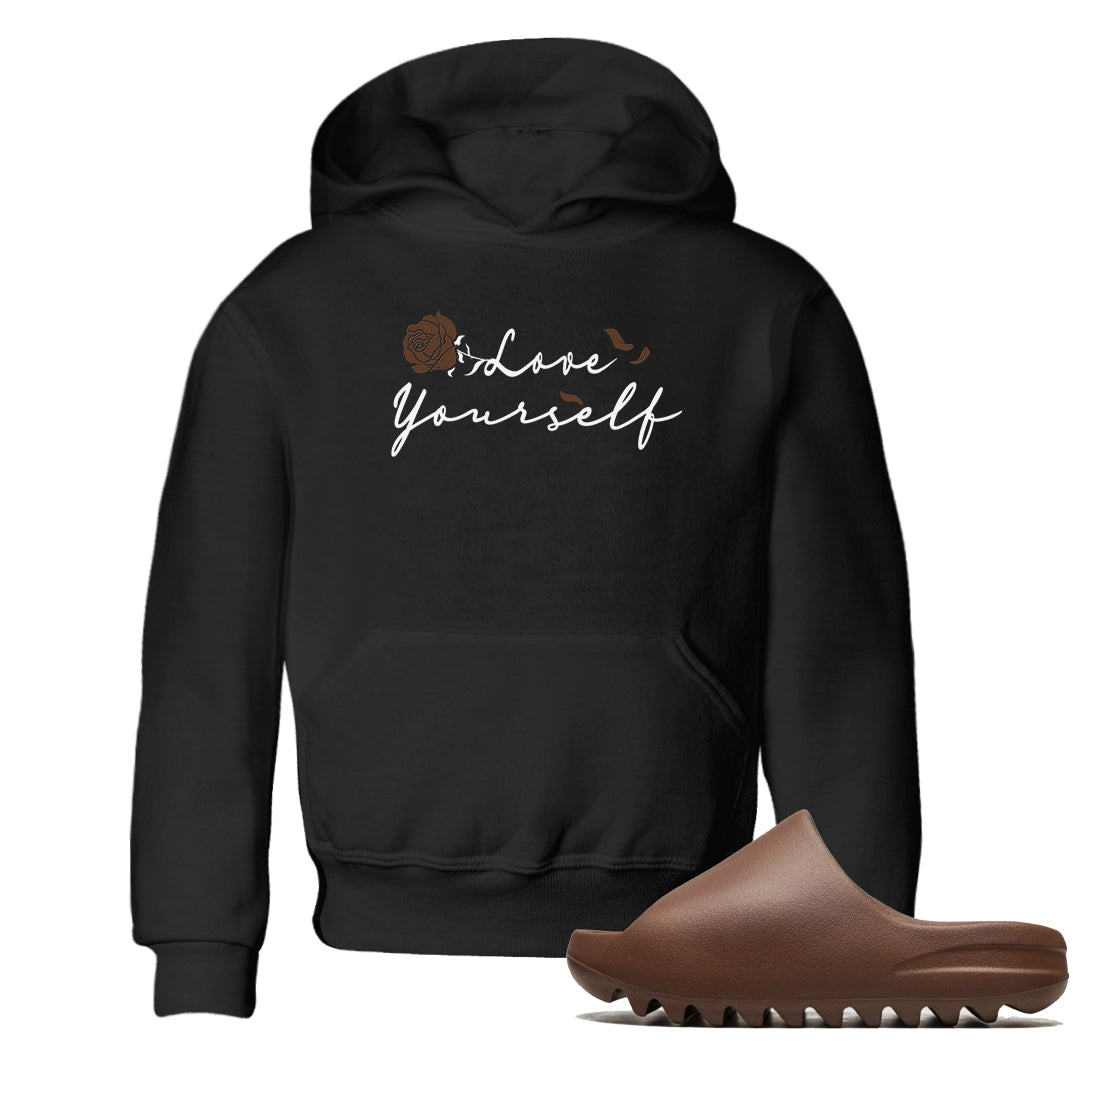 Yeezy Slide Flax shirts to match jordans Love Yourself sneaker match tees Yeezy Slide Flax SNRT Sneaker Tees streetwear brand Baby and Youth Black 1 cotton tee